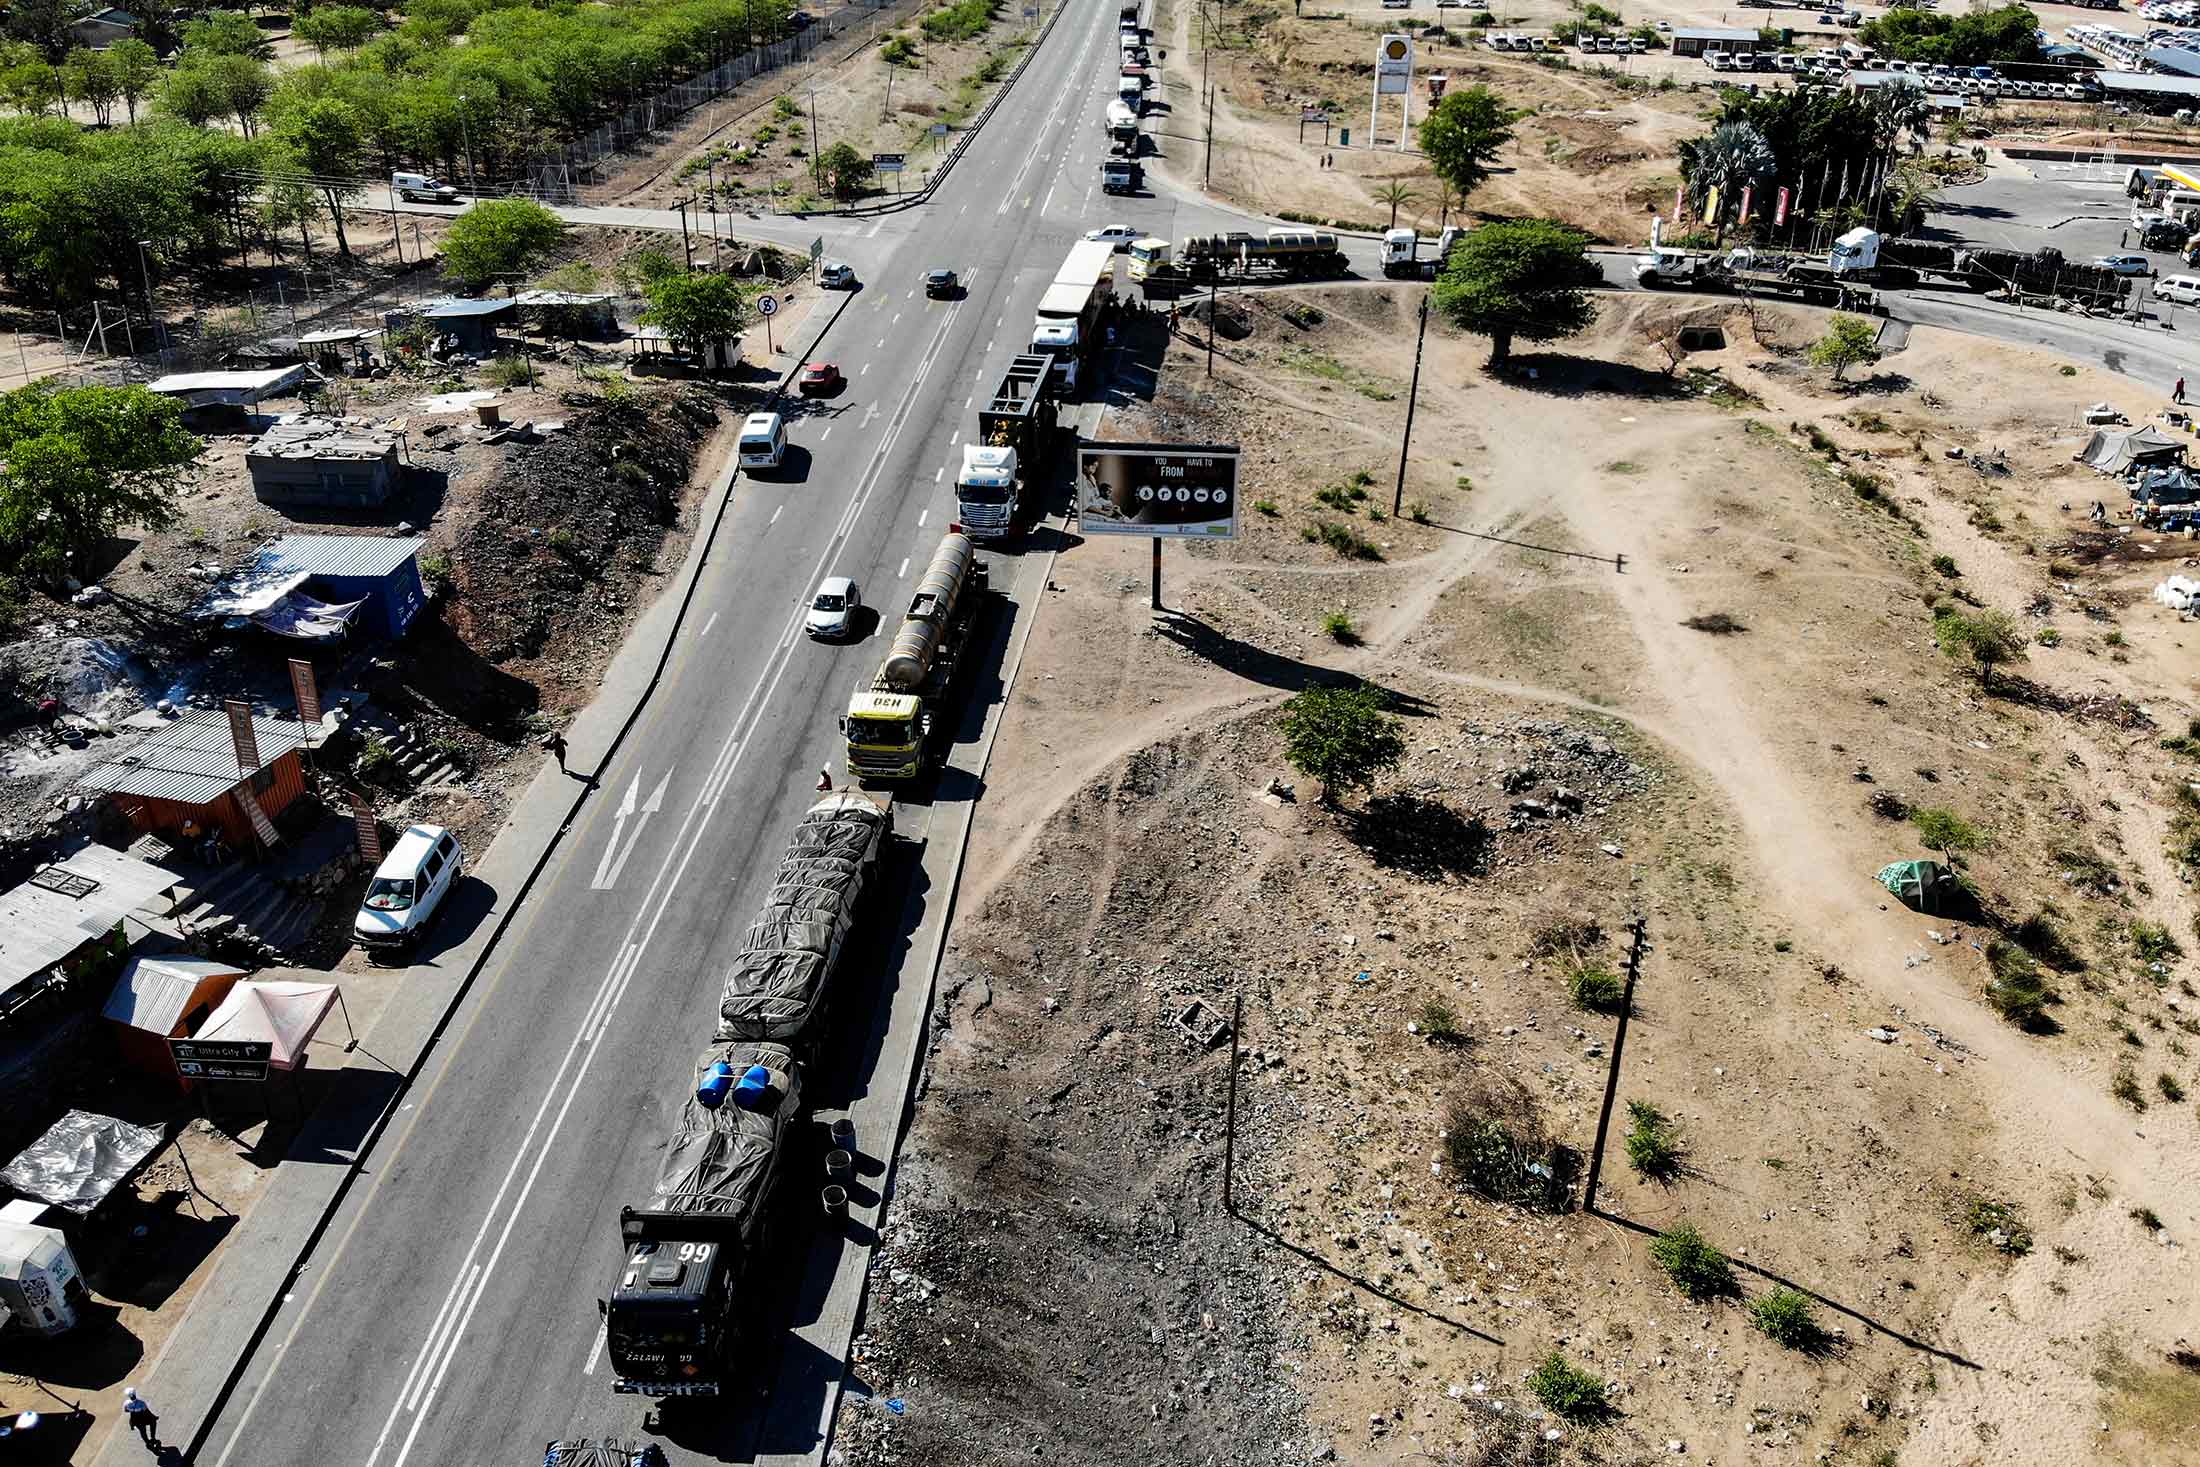 A queue builds as trucks wait to go through immigration formalities at Beitbridge on the South Africa-Zimbabwe&nbsp;border.